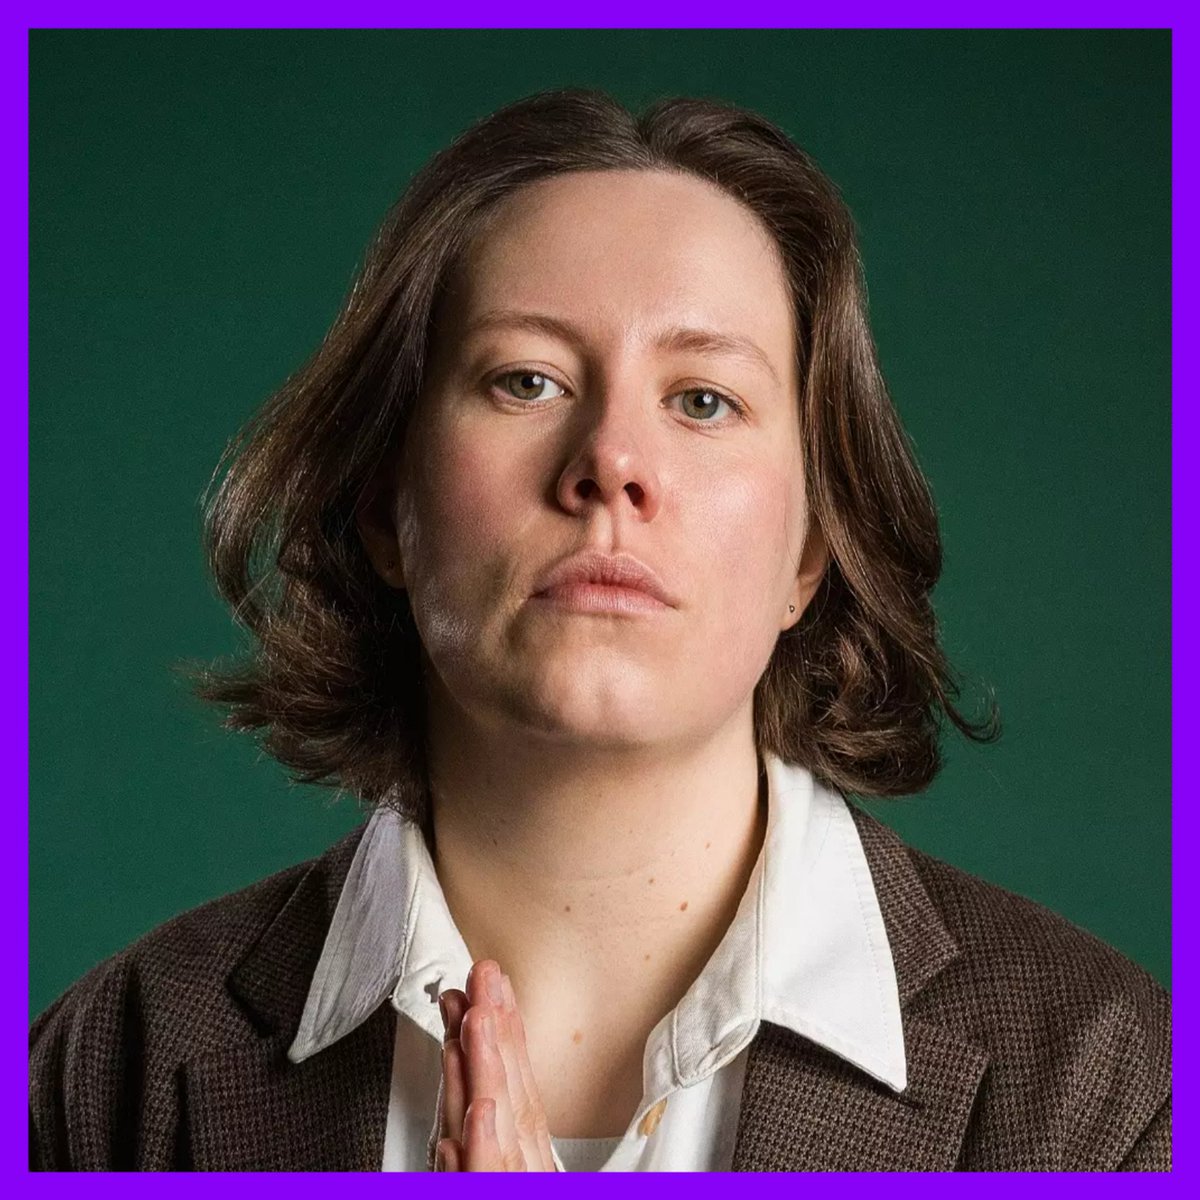 TONIGHT AT BRIGHTON FRINGE: 20:15 Chloe Petts As seen on last week's Have I Got News For You! Tickets £10 from brightonfringe.org/events/chloe-p… @ChloePetts @lhcomedy